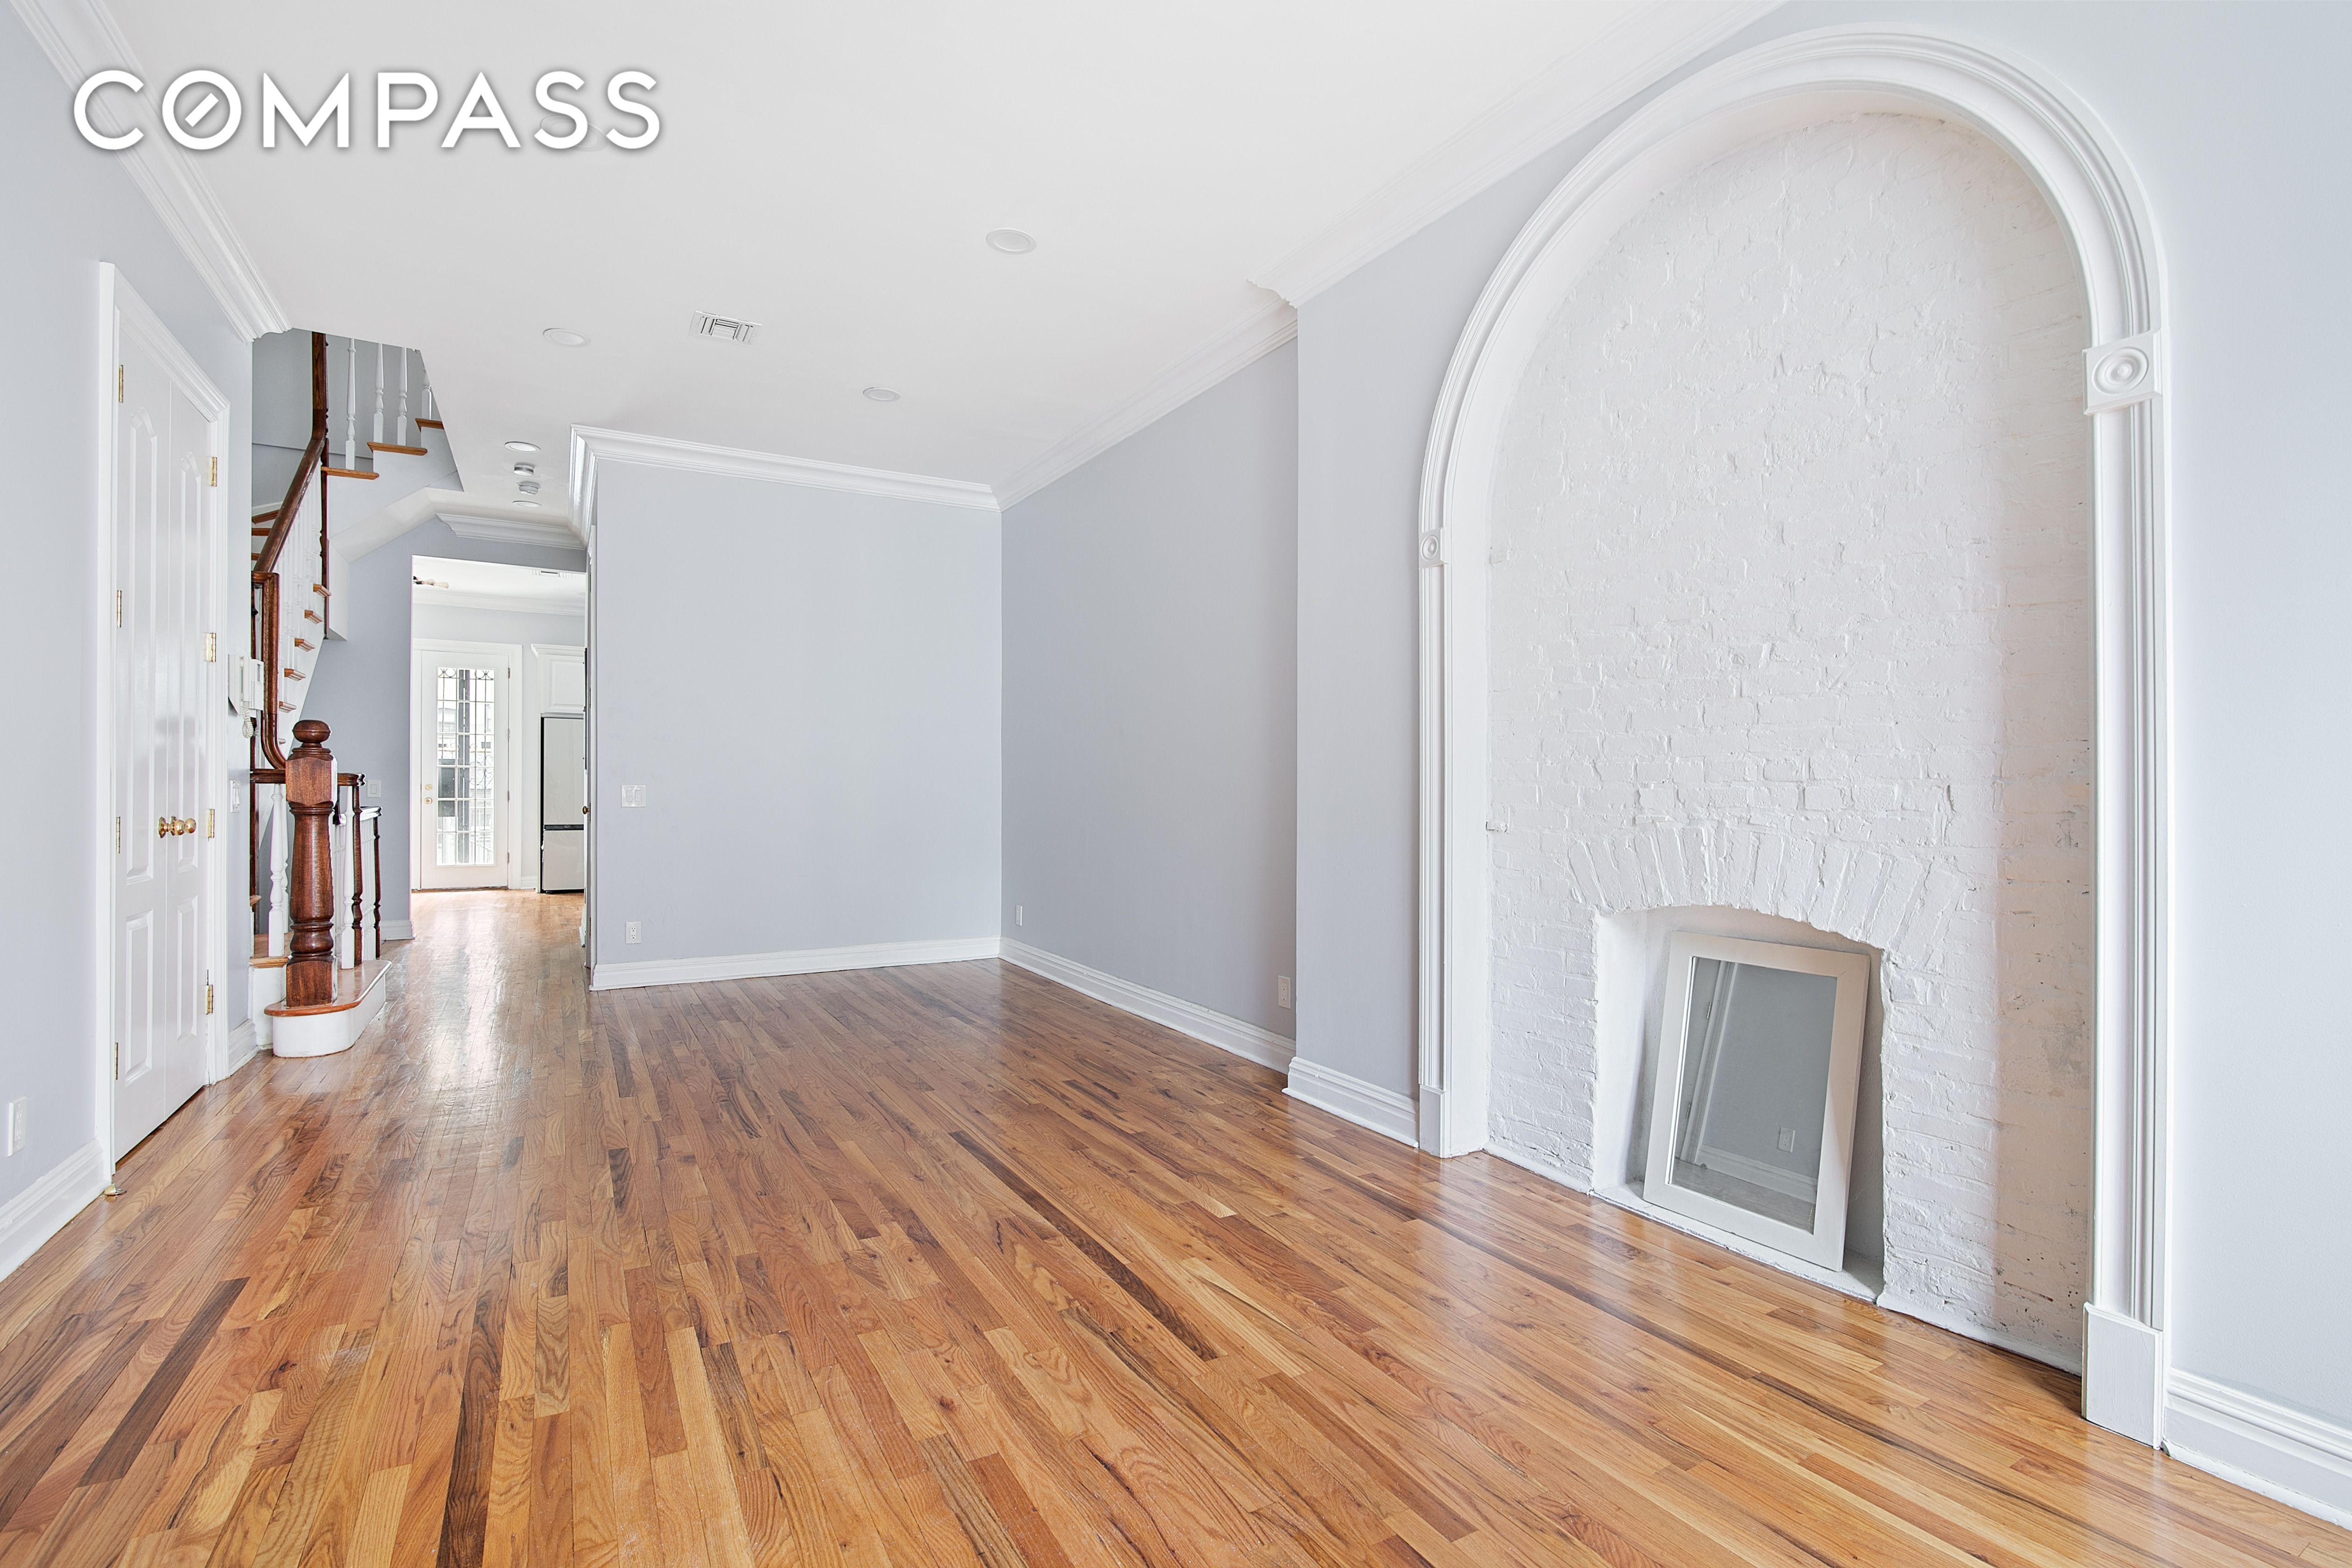 116 West 136th Street 2, Central Harlem, Upper Manhattan, NYC - 3 Bedrooms  
2.5 Bathrooms  
5 Rooms - 